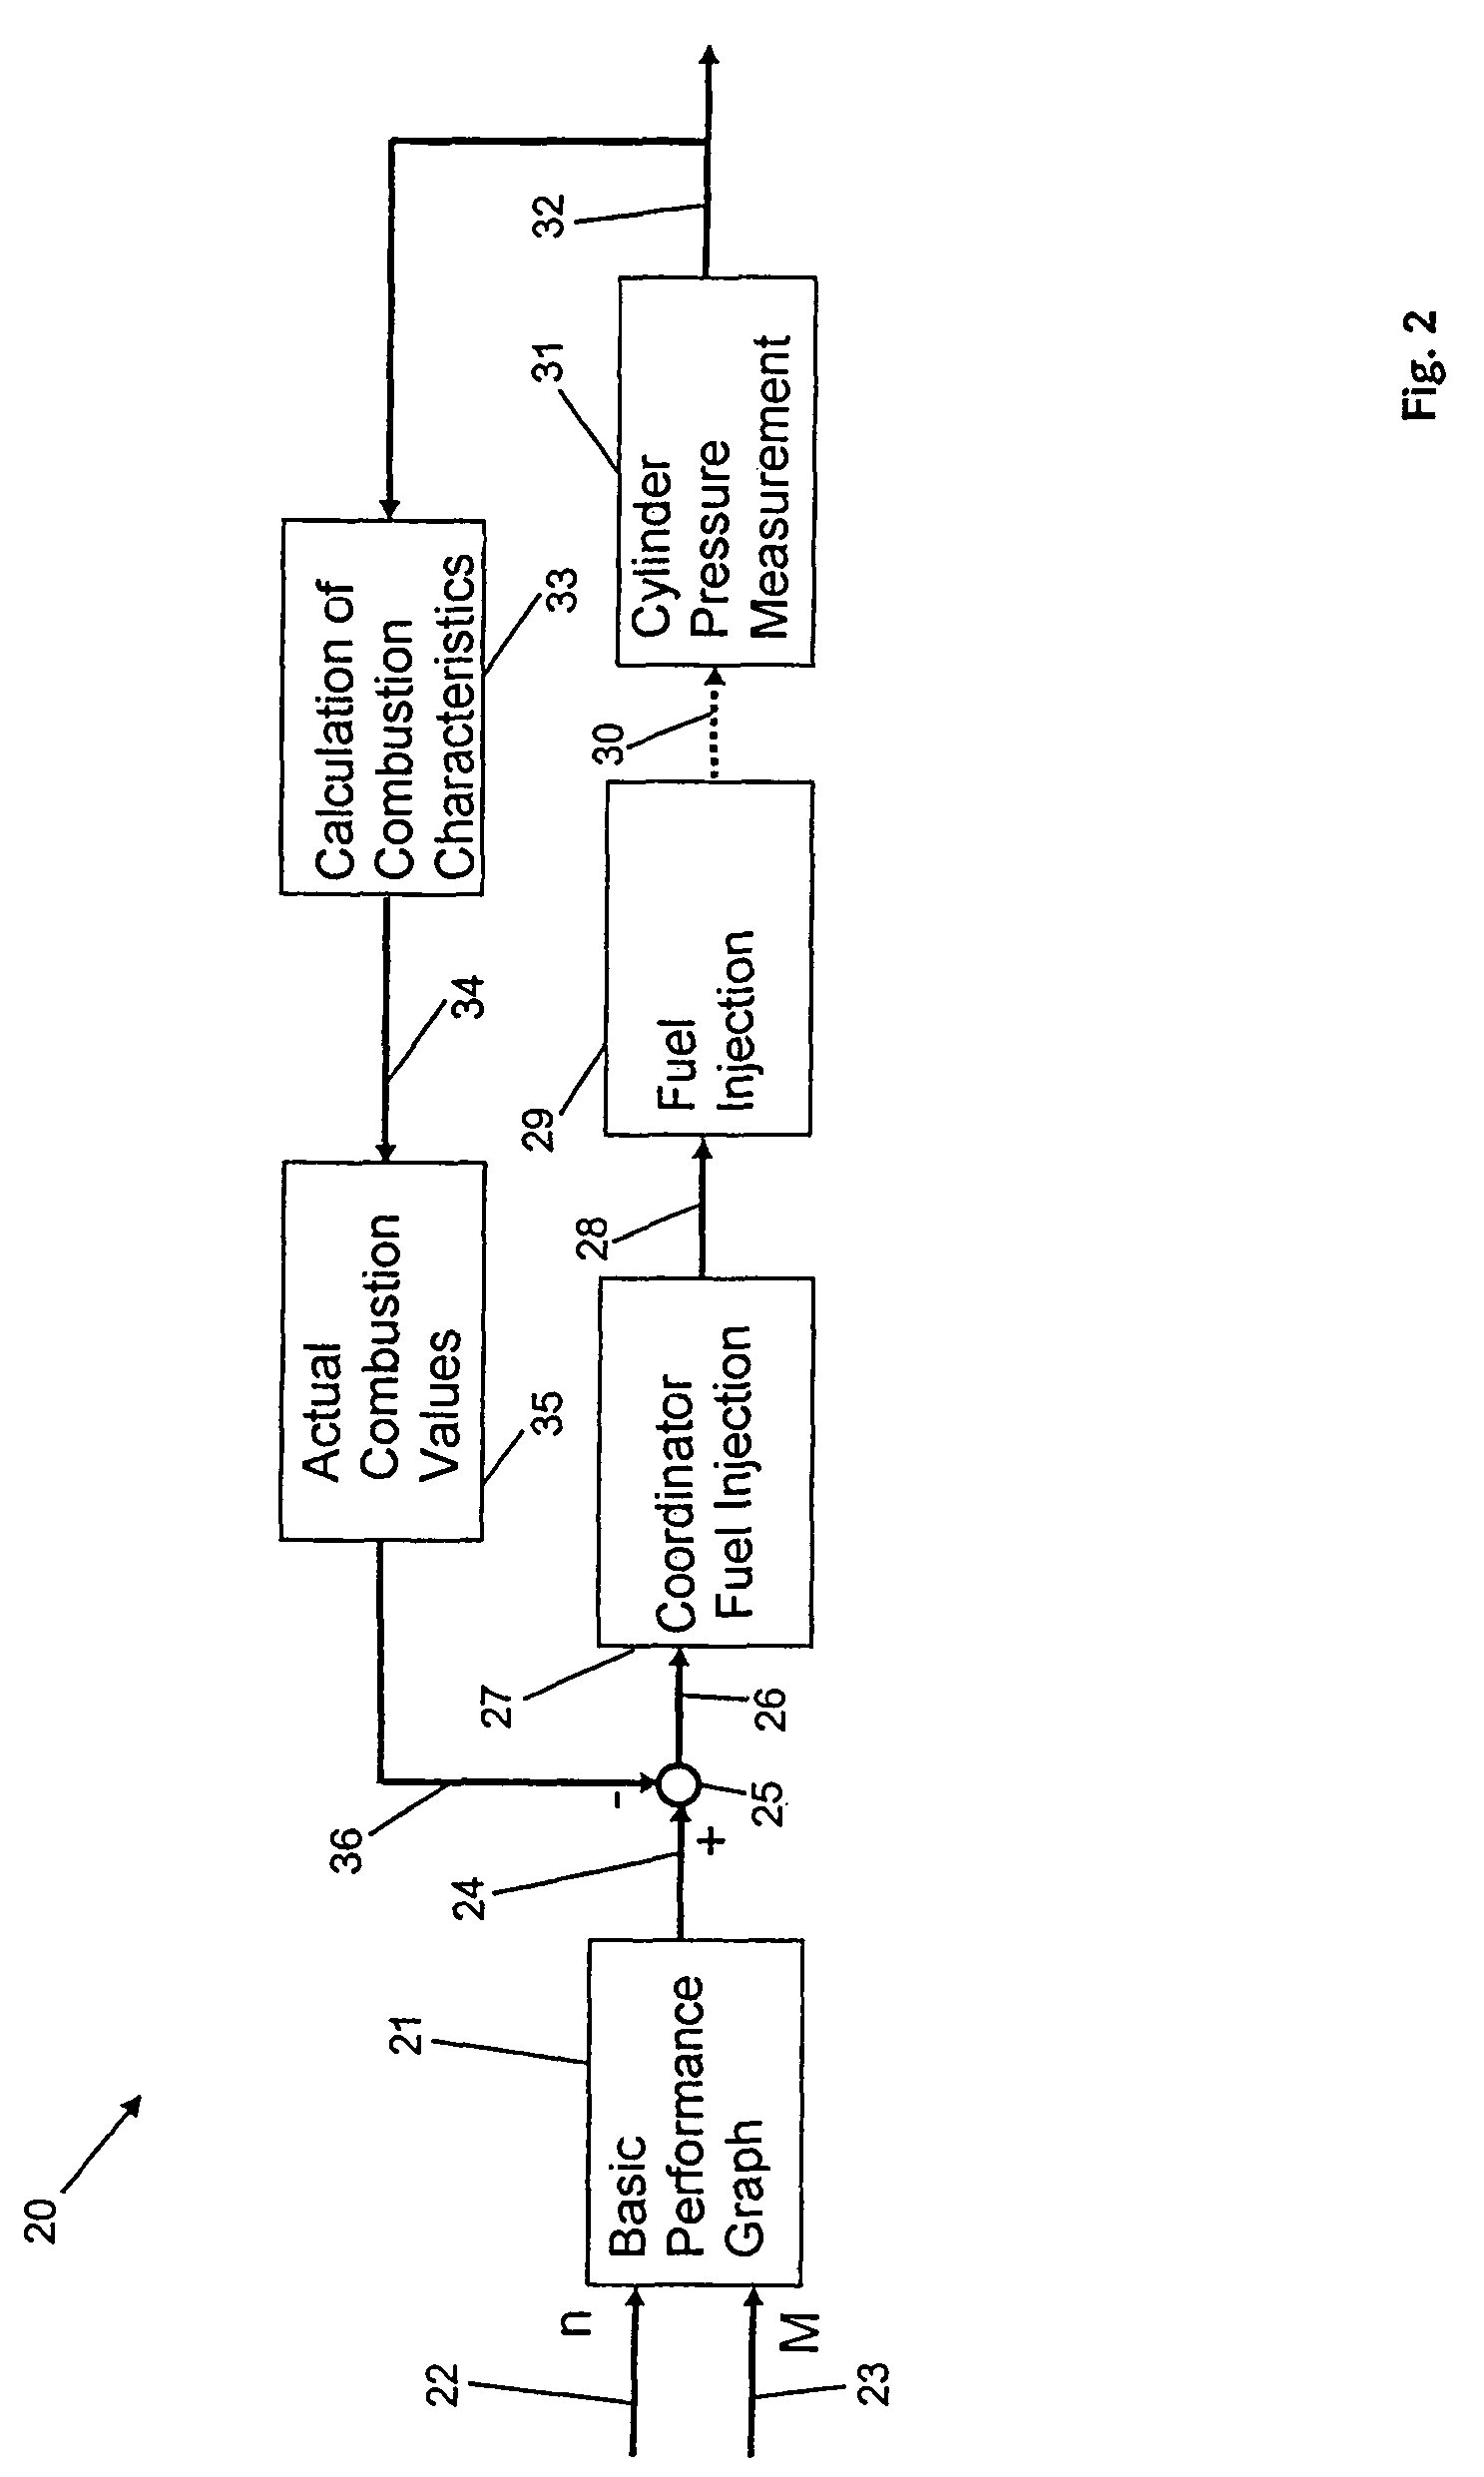 Method of controlling an internal combustion engine, in particular a diesel engine